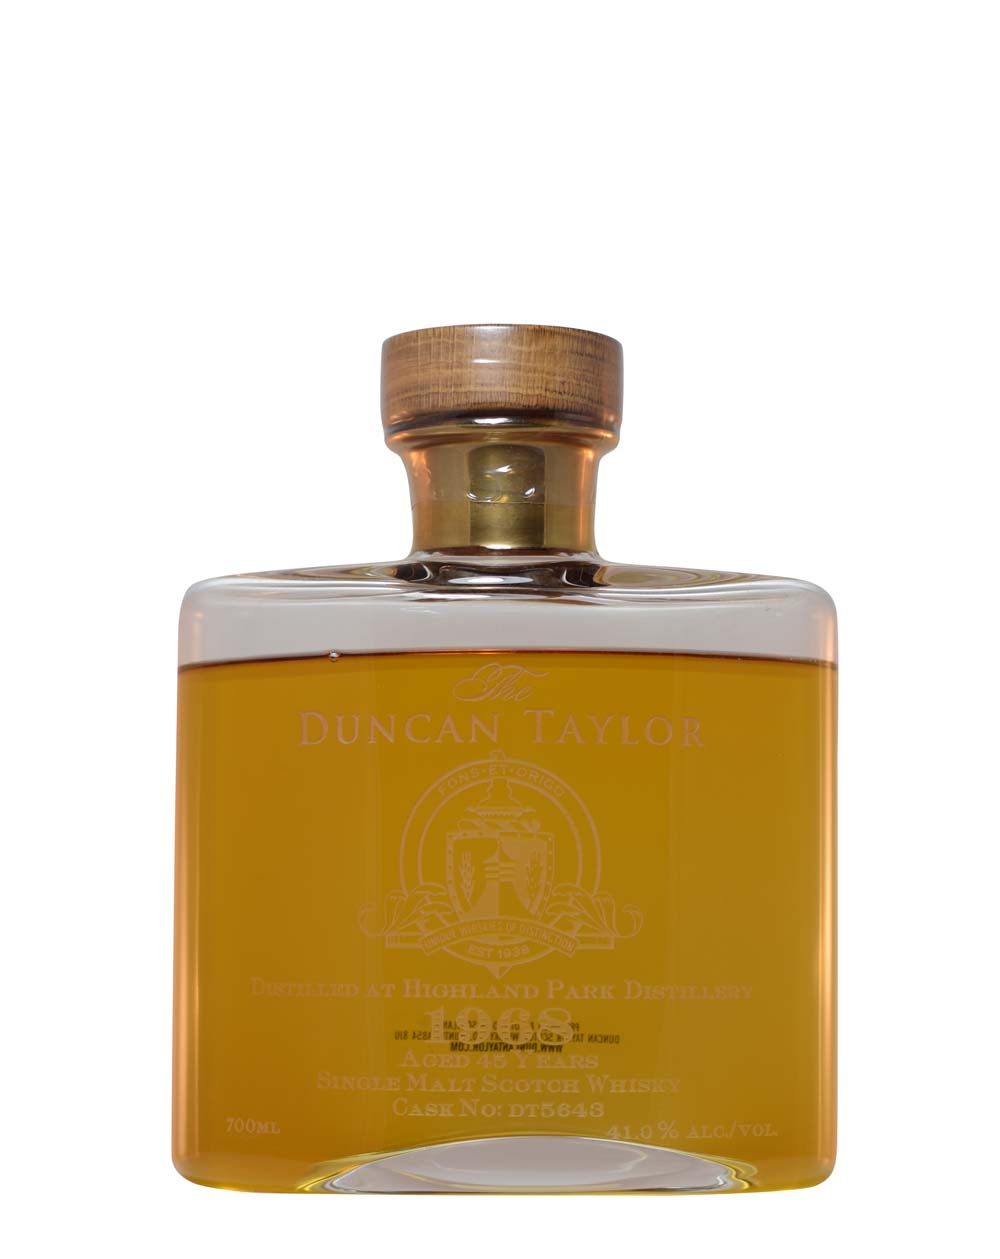 Highland Park 1968 Cask #DT5643 - Tantalus (44 Years Old) Musthave Malts MHM